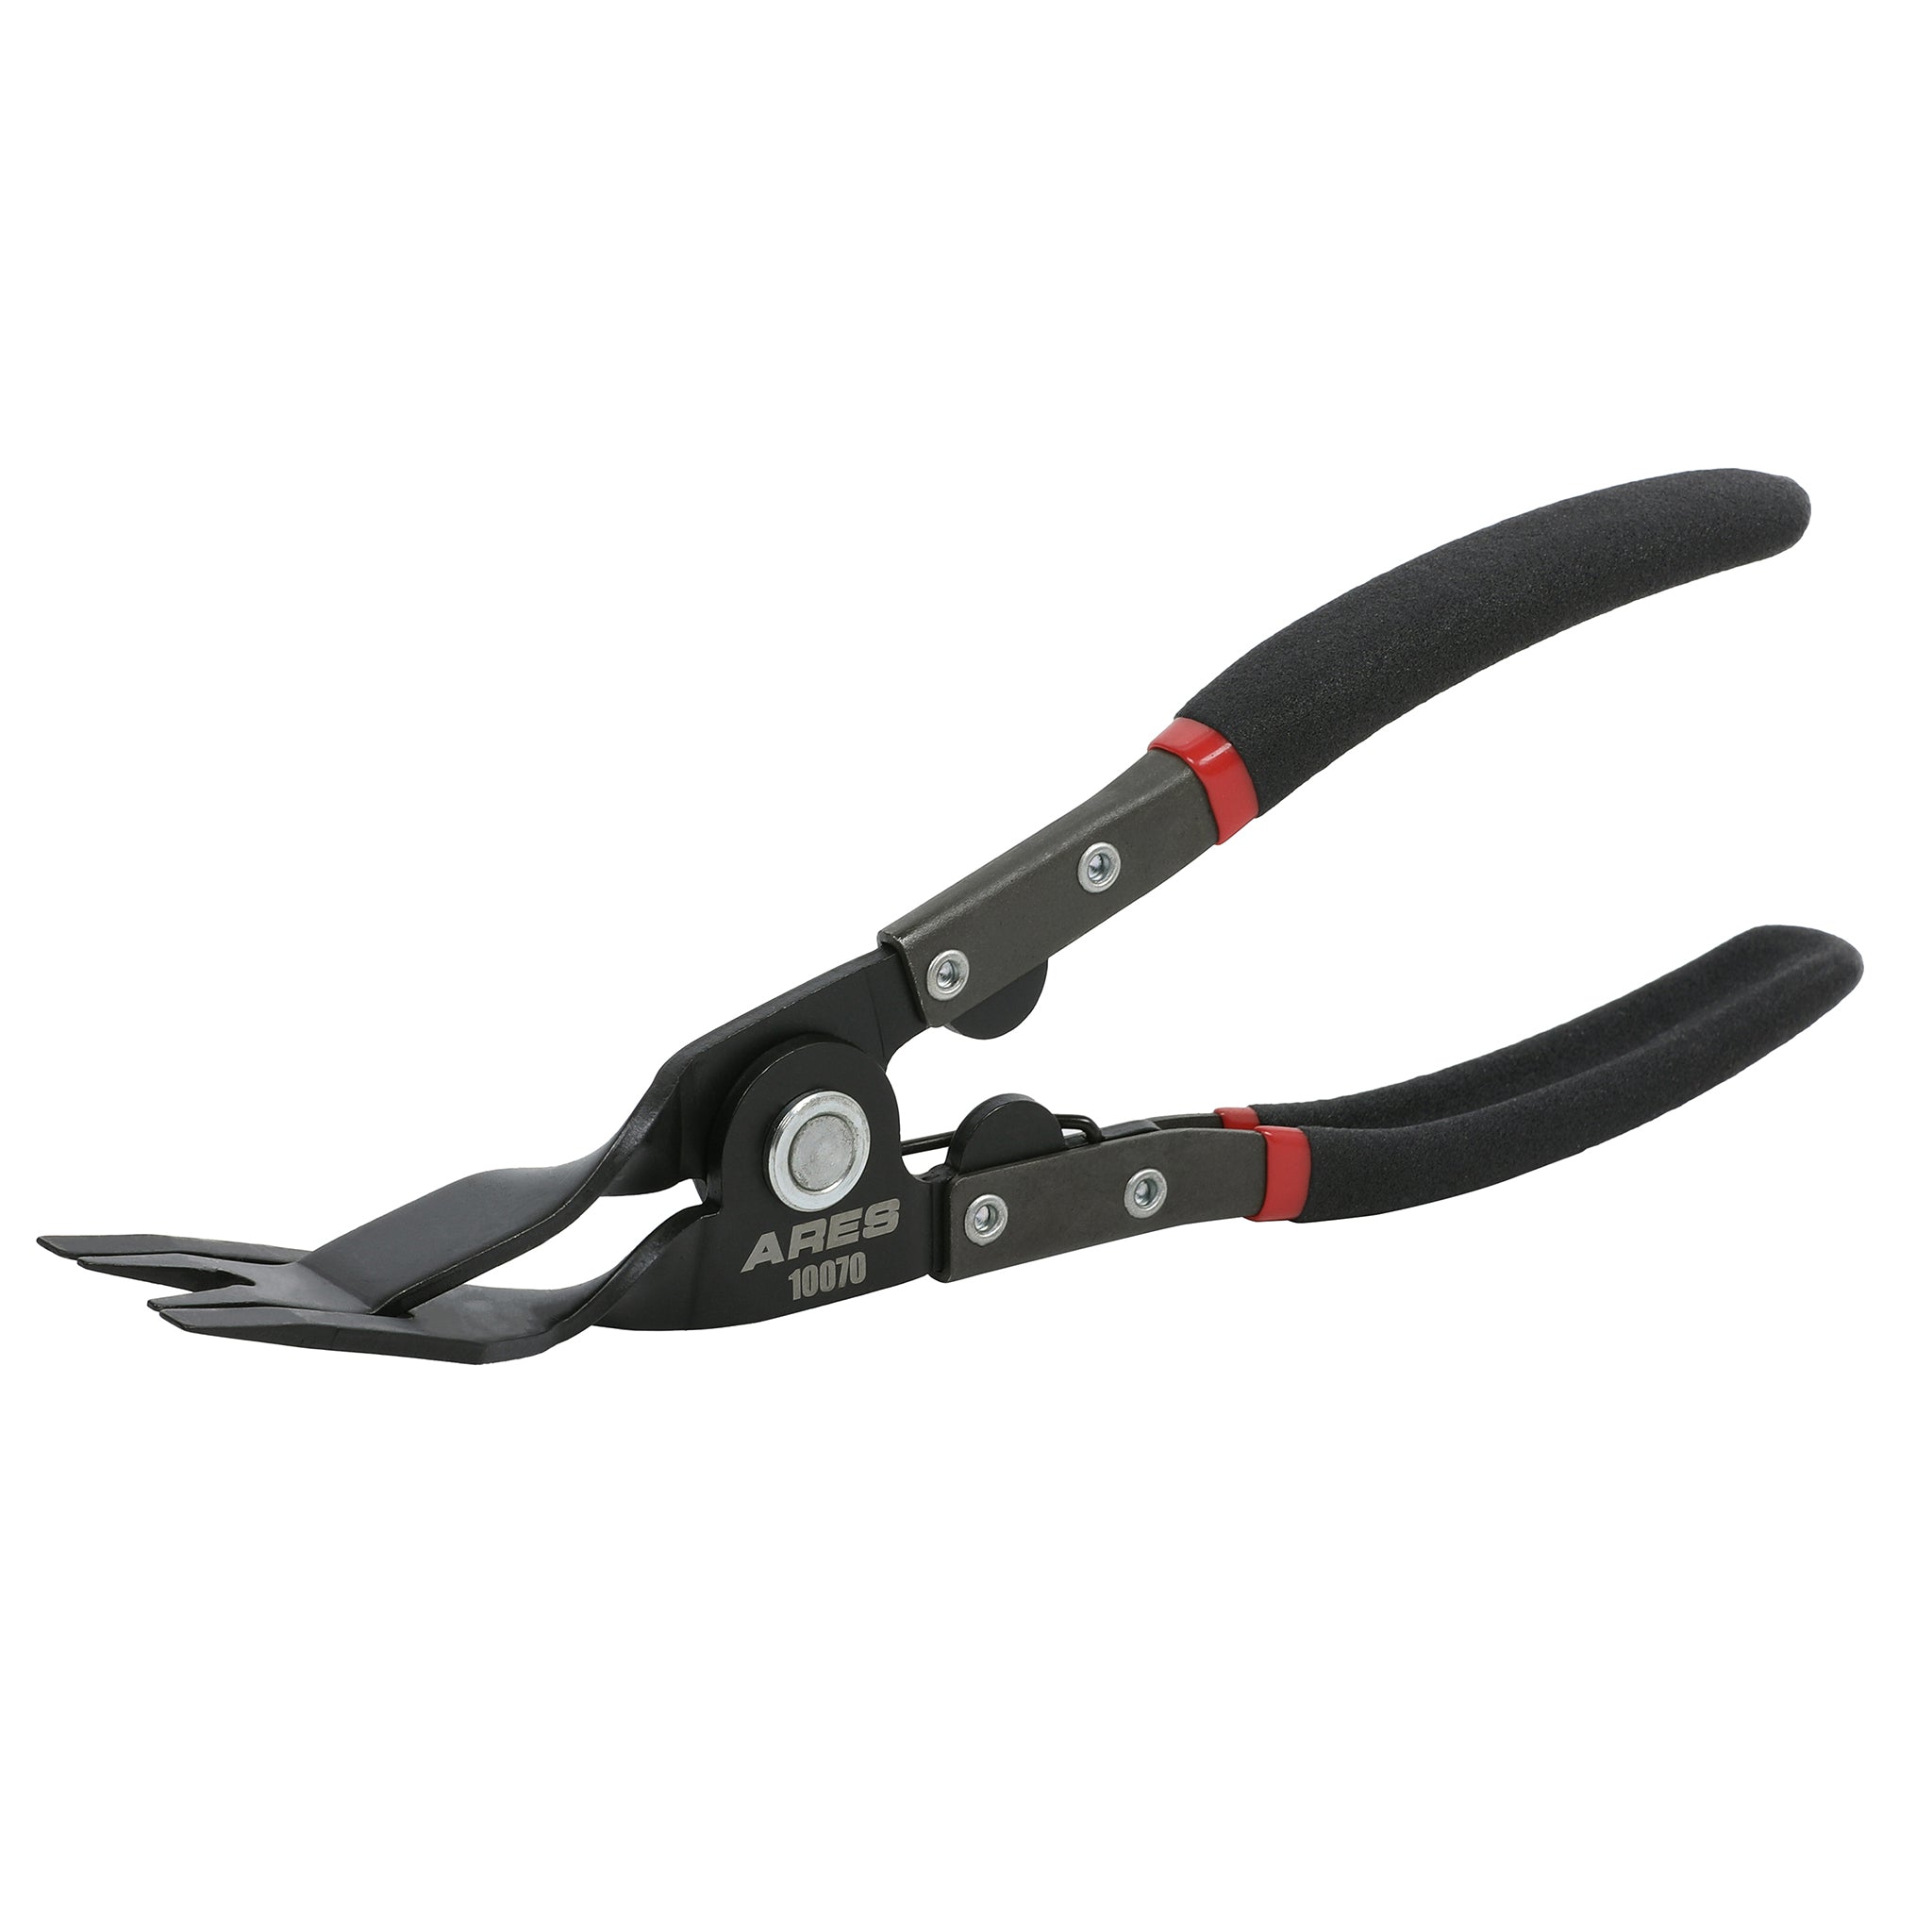 Swpeet 3Pcs Body Clip Removal Pliers Set, Including 30 Degree and